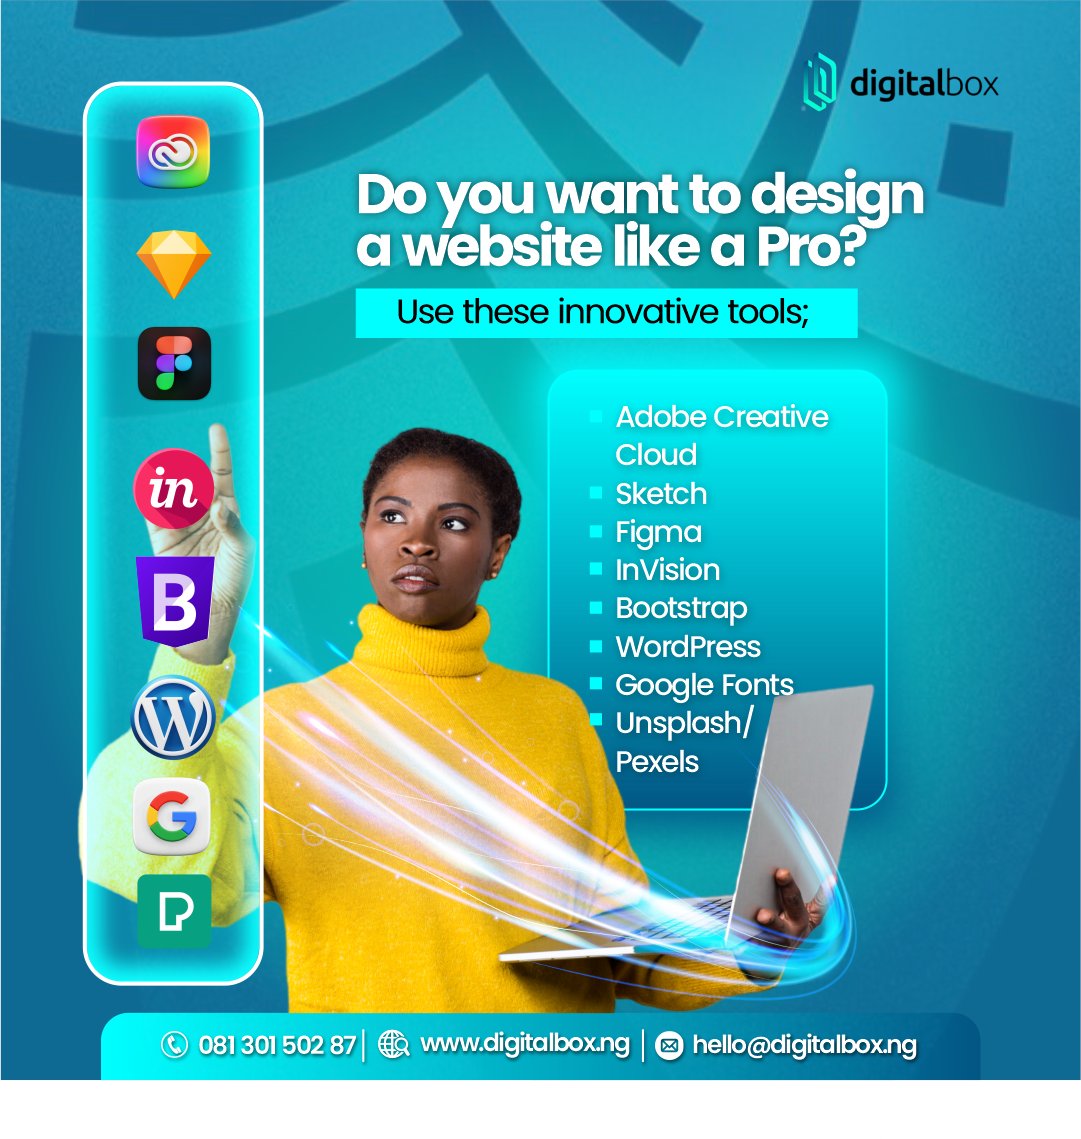 Hey Techy!!! here are some #webdesign tools that help you create amazing digital experiences on the web.

 Follow Digitalbox for the newest trends, tips, and tools to improve your digital skills.

#Digitalbox
#WebDesignInnovation
#DigitalExperience
#CreativeWebDesign
#DesignTools